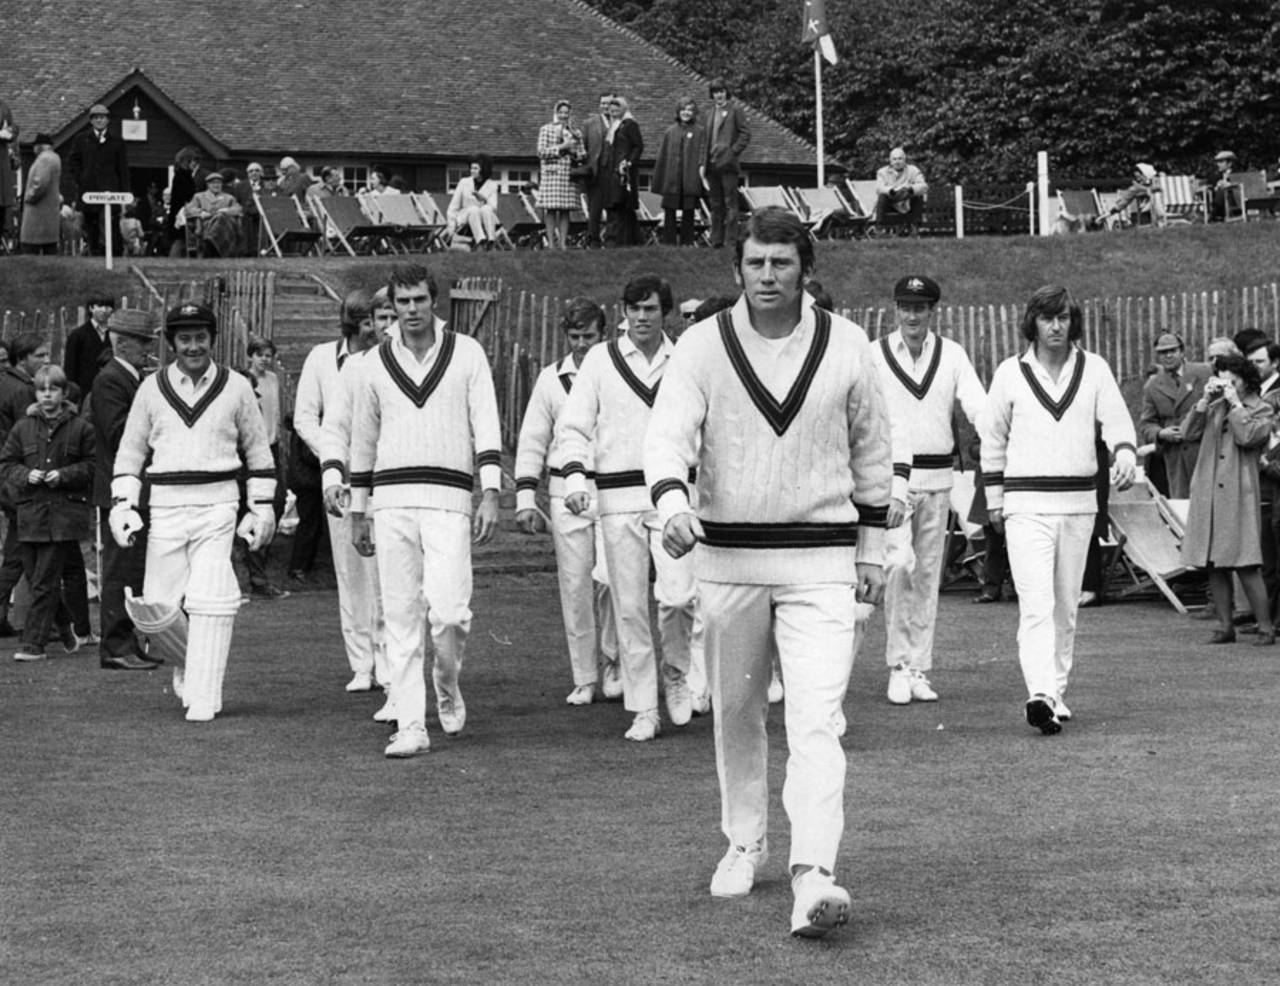 Ian Chappell leads the Australians out, Arundel, April 22, 1972